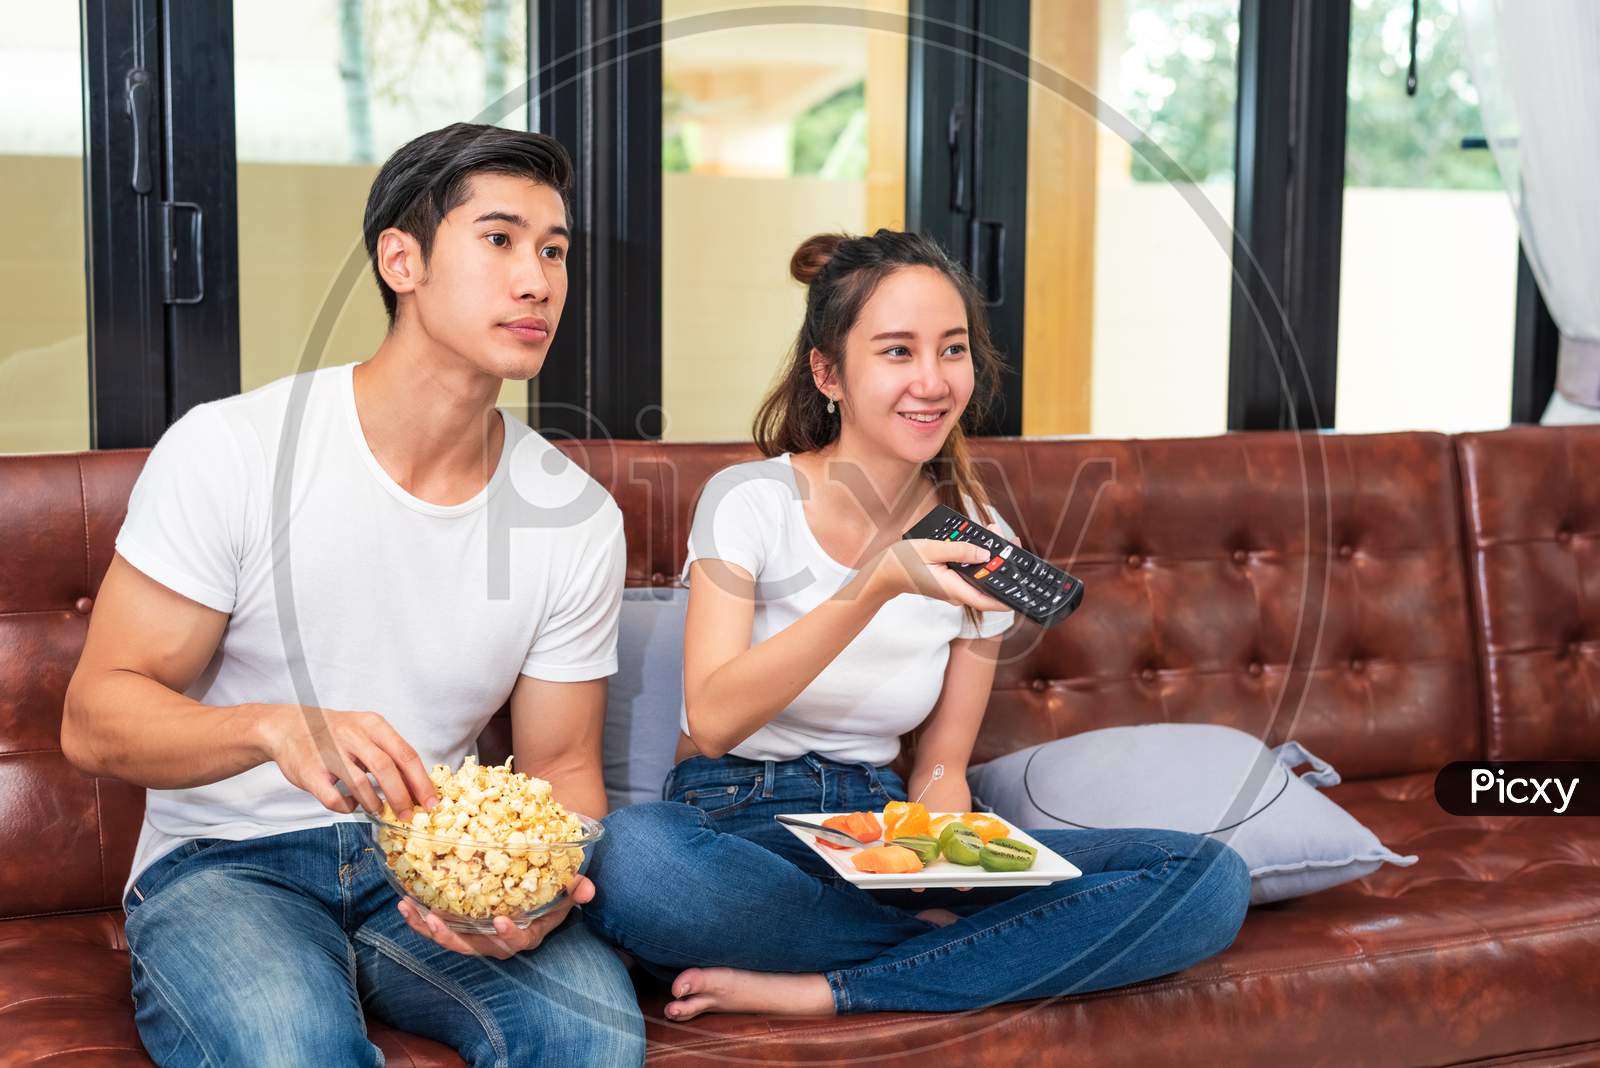 Asian Couples Watching Television Together On Sofa In Their Home. People And Lifestyles Concept. Vacation And Holiday Concept. Honeymoon And Pre Wedding Theme. Happy Family Activity In Valentines Day